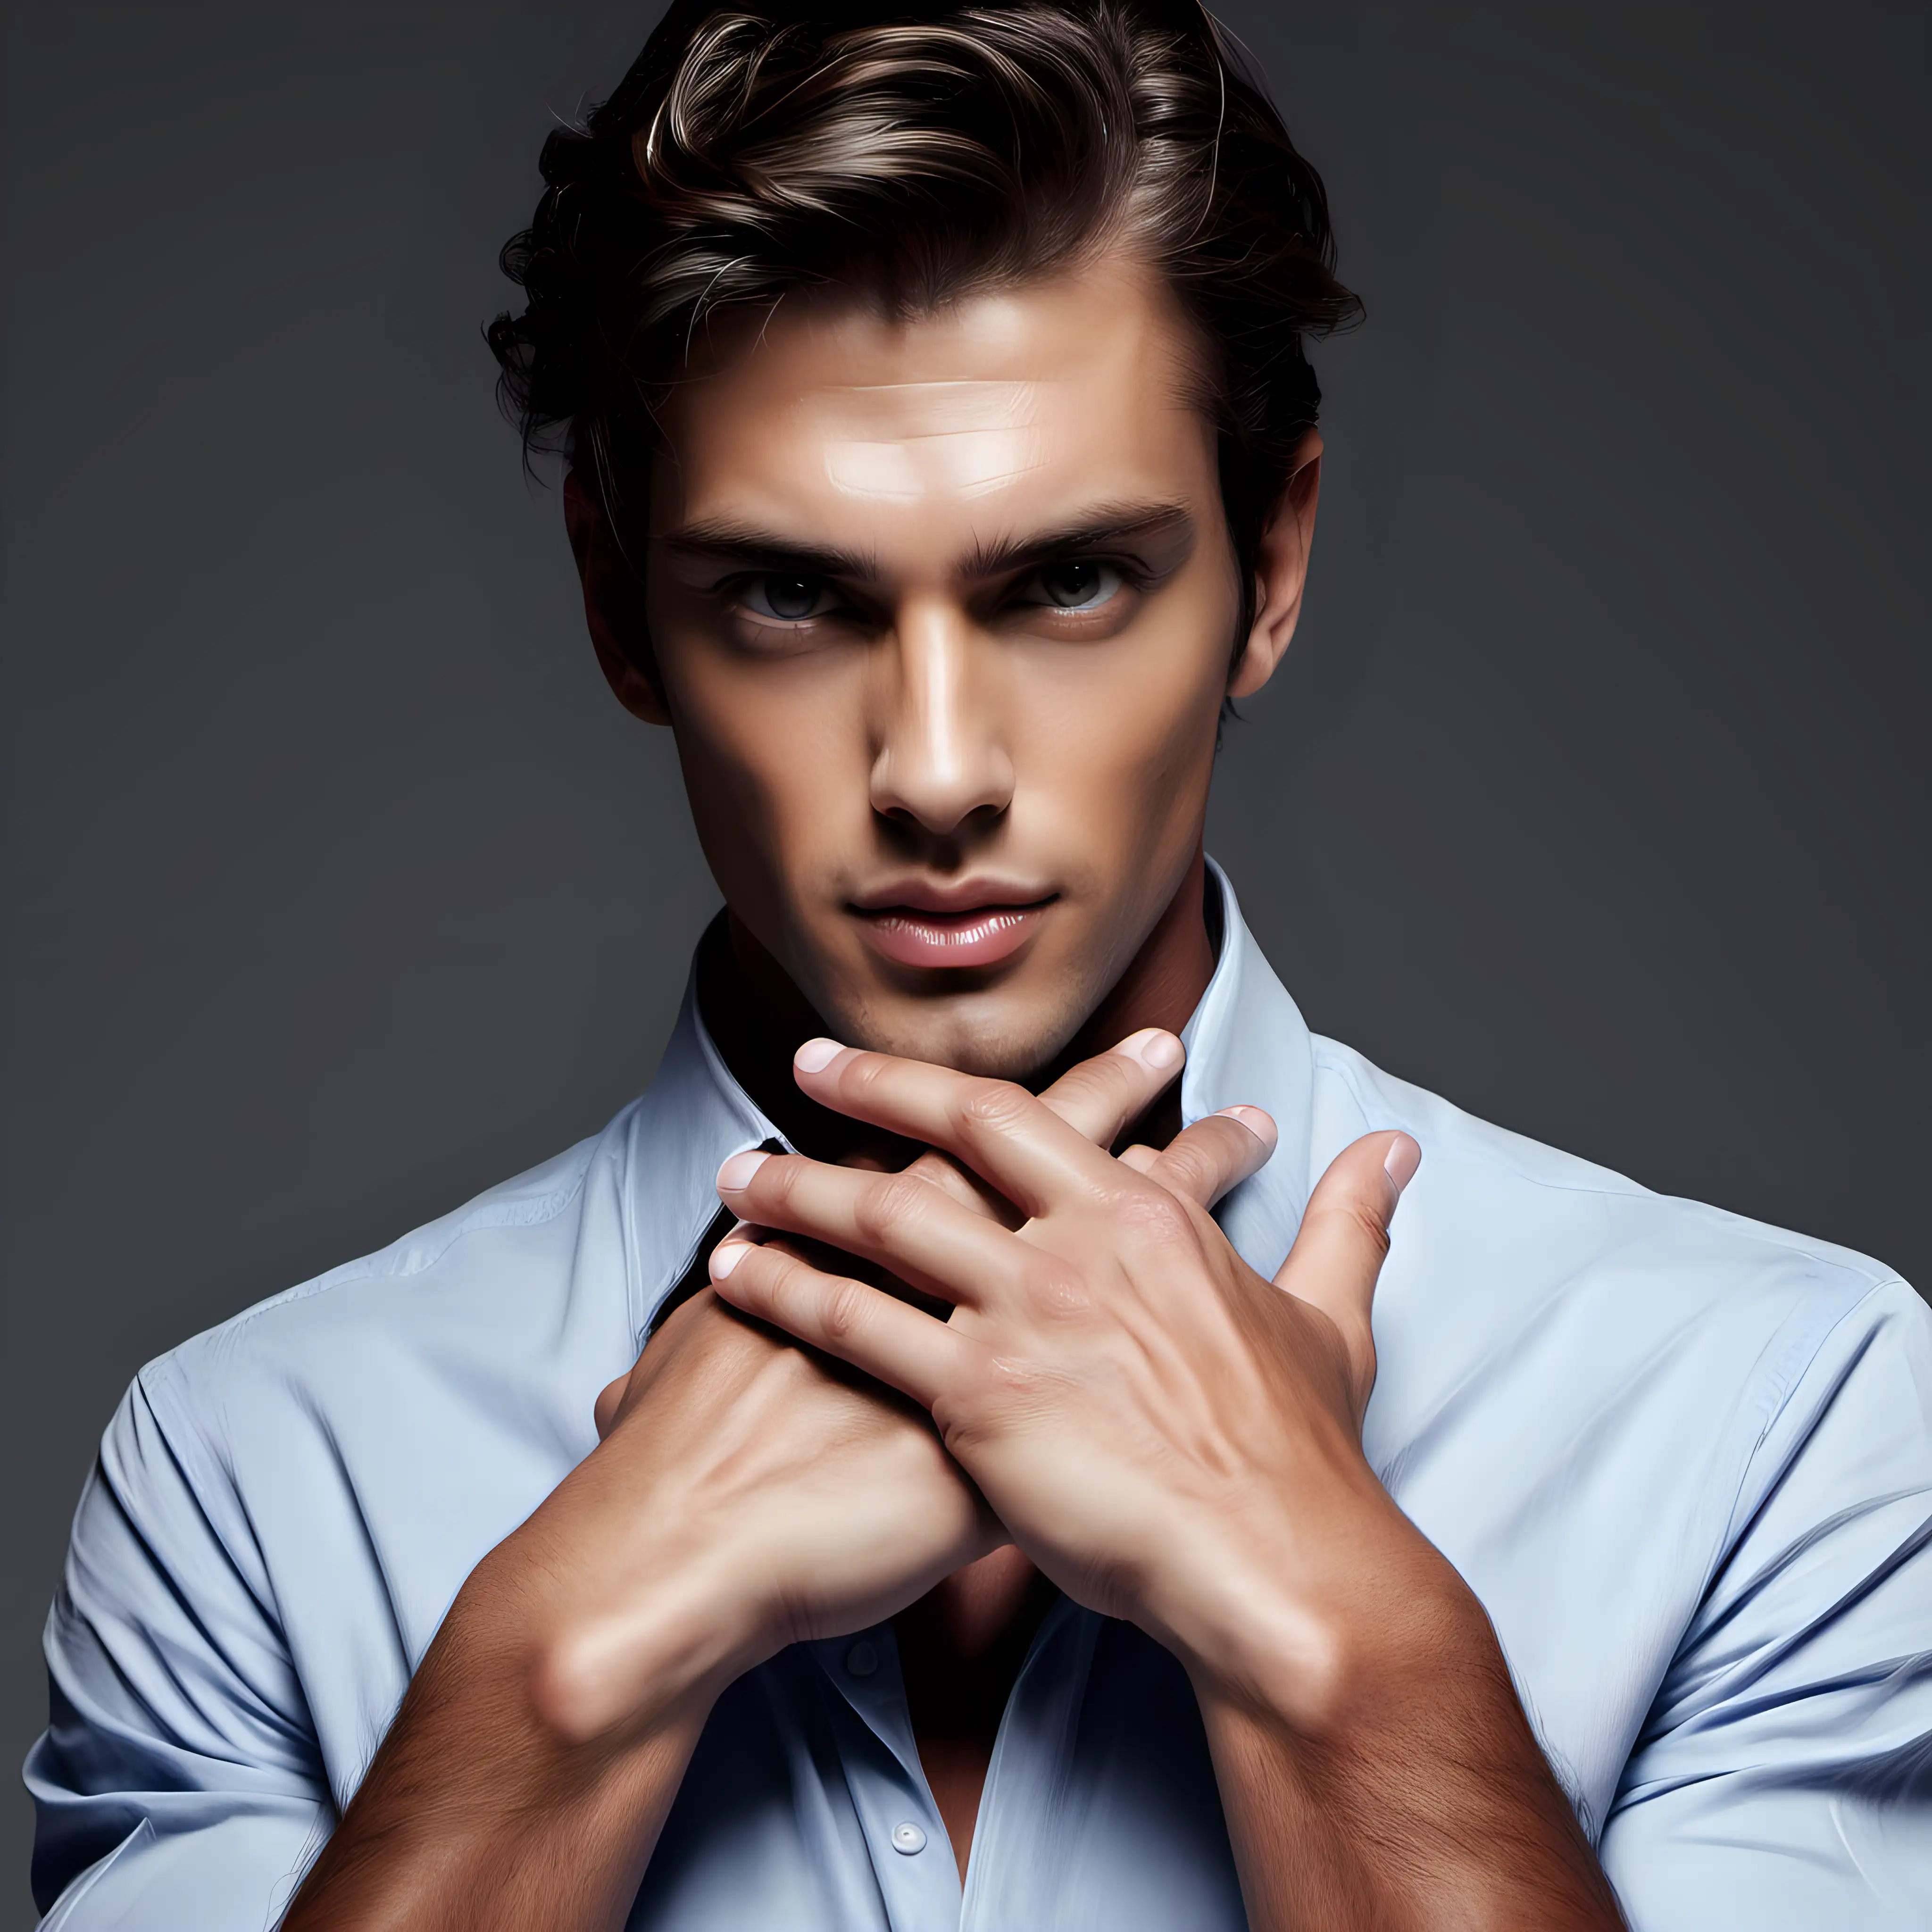 Confident Handsome Male Model Displaying Elegance and Style | MUSE AI